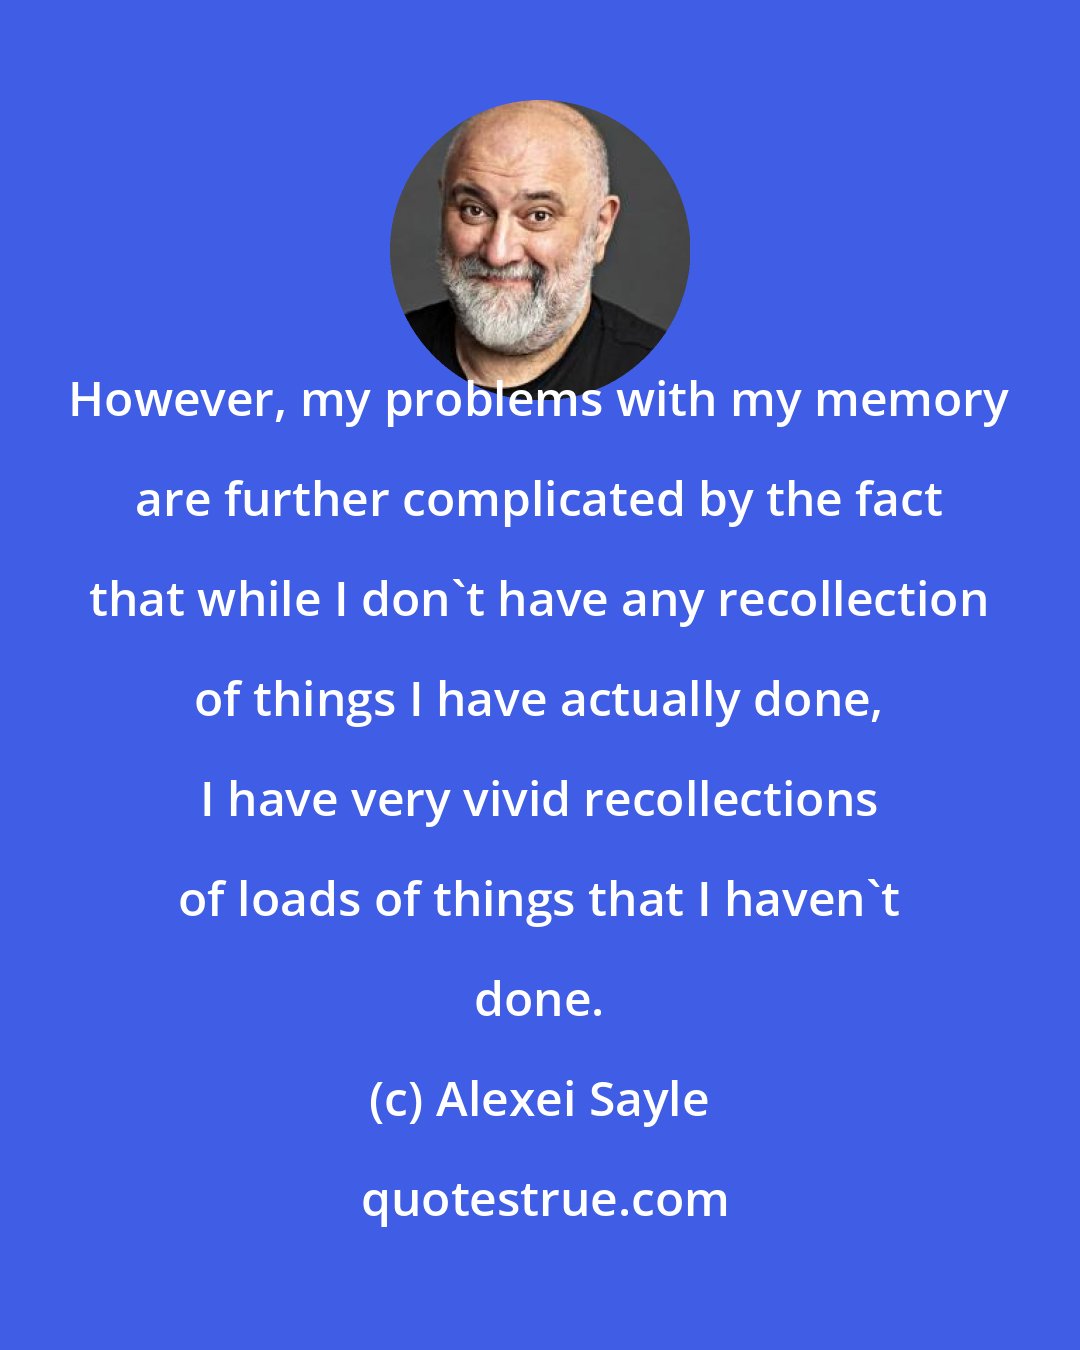 Alexei Sayle: However, my problems with my memory are further complicated by the fact that while I don't have any recollection of things I have actually done, I have very vivid recollections of loads of things that I haven't done.